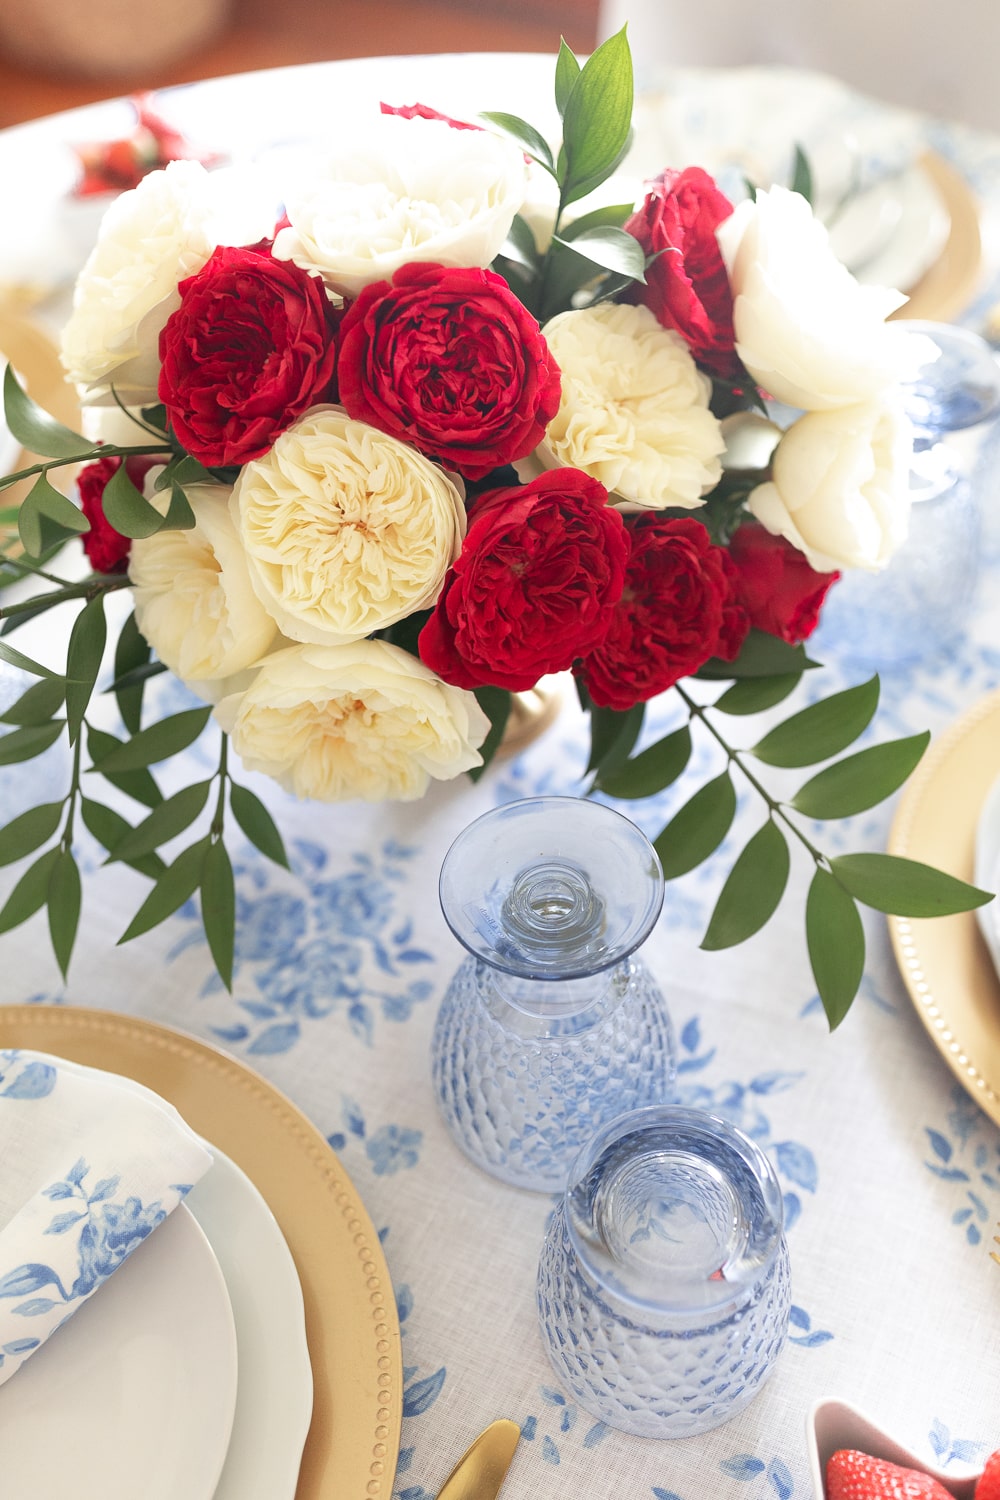 Blogger Stephanie Ziajka shares one of her 4th of july centerpieces, which uses Grace Rose Farm Tess and Leonora garden roses, on Diary of a Debutante